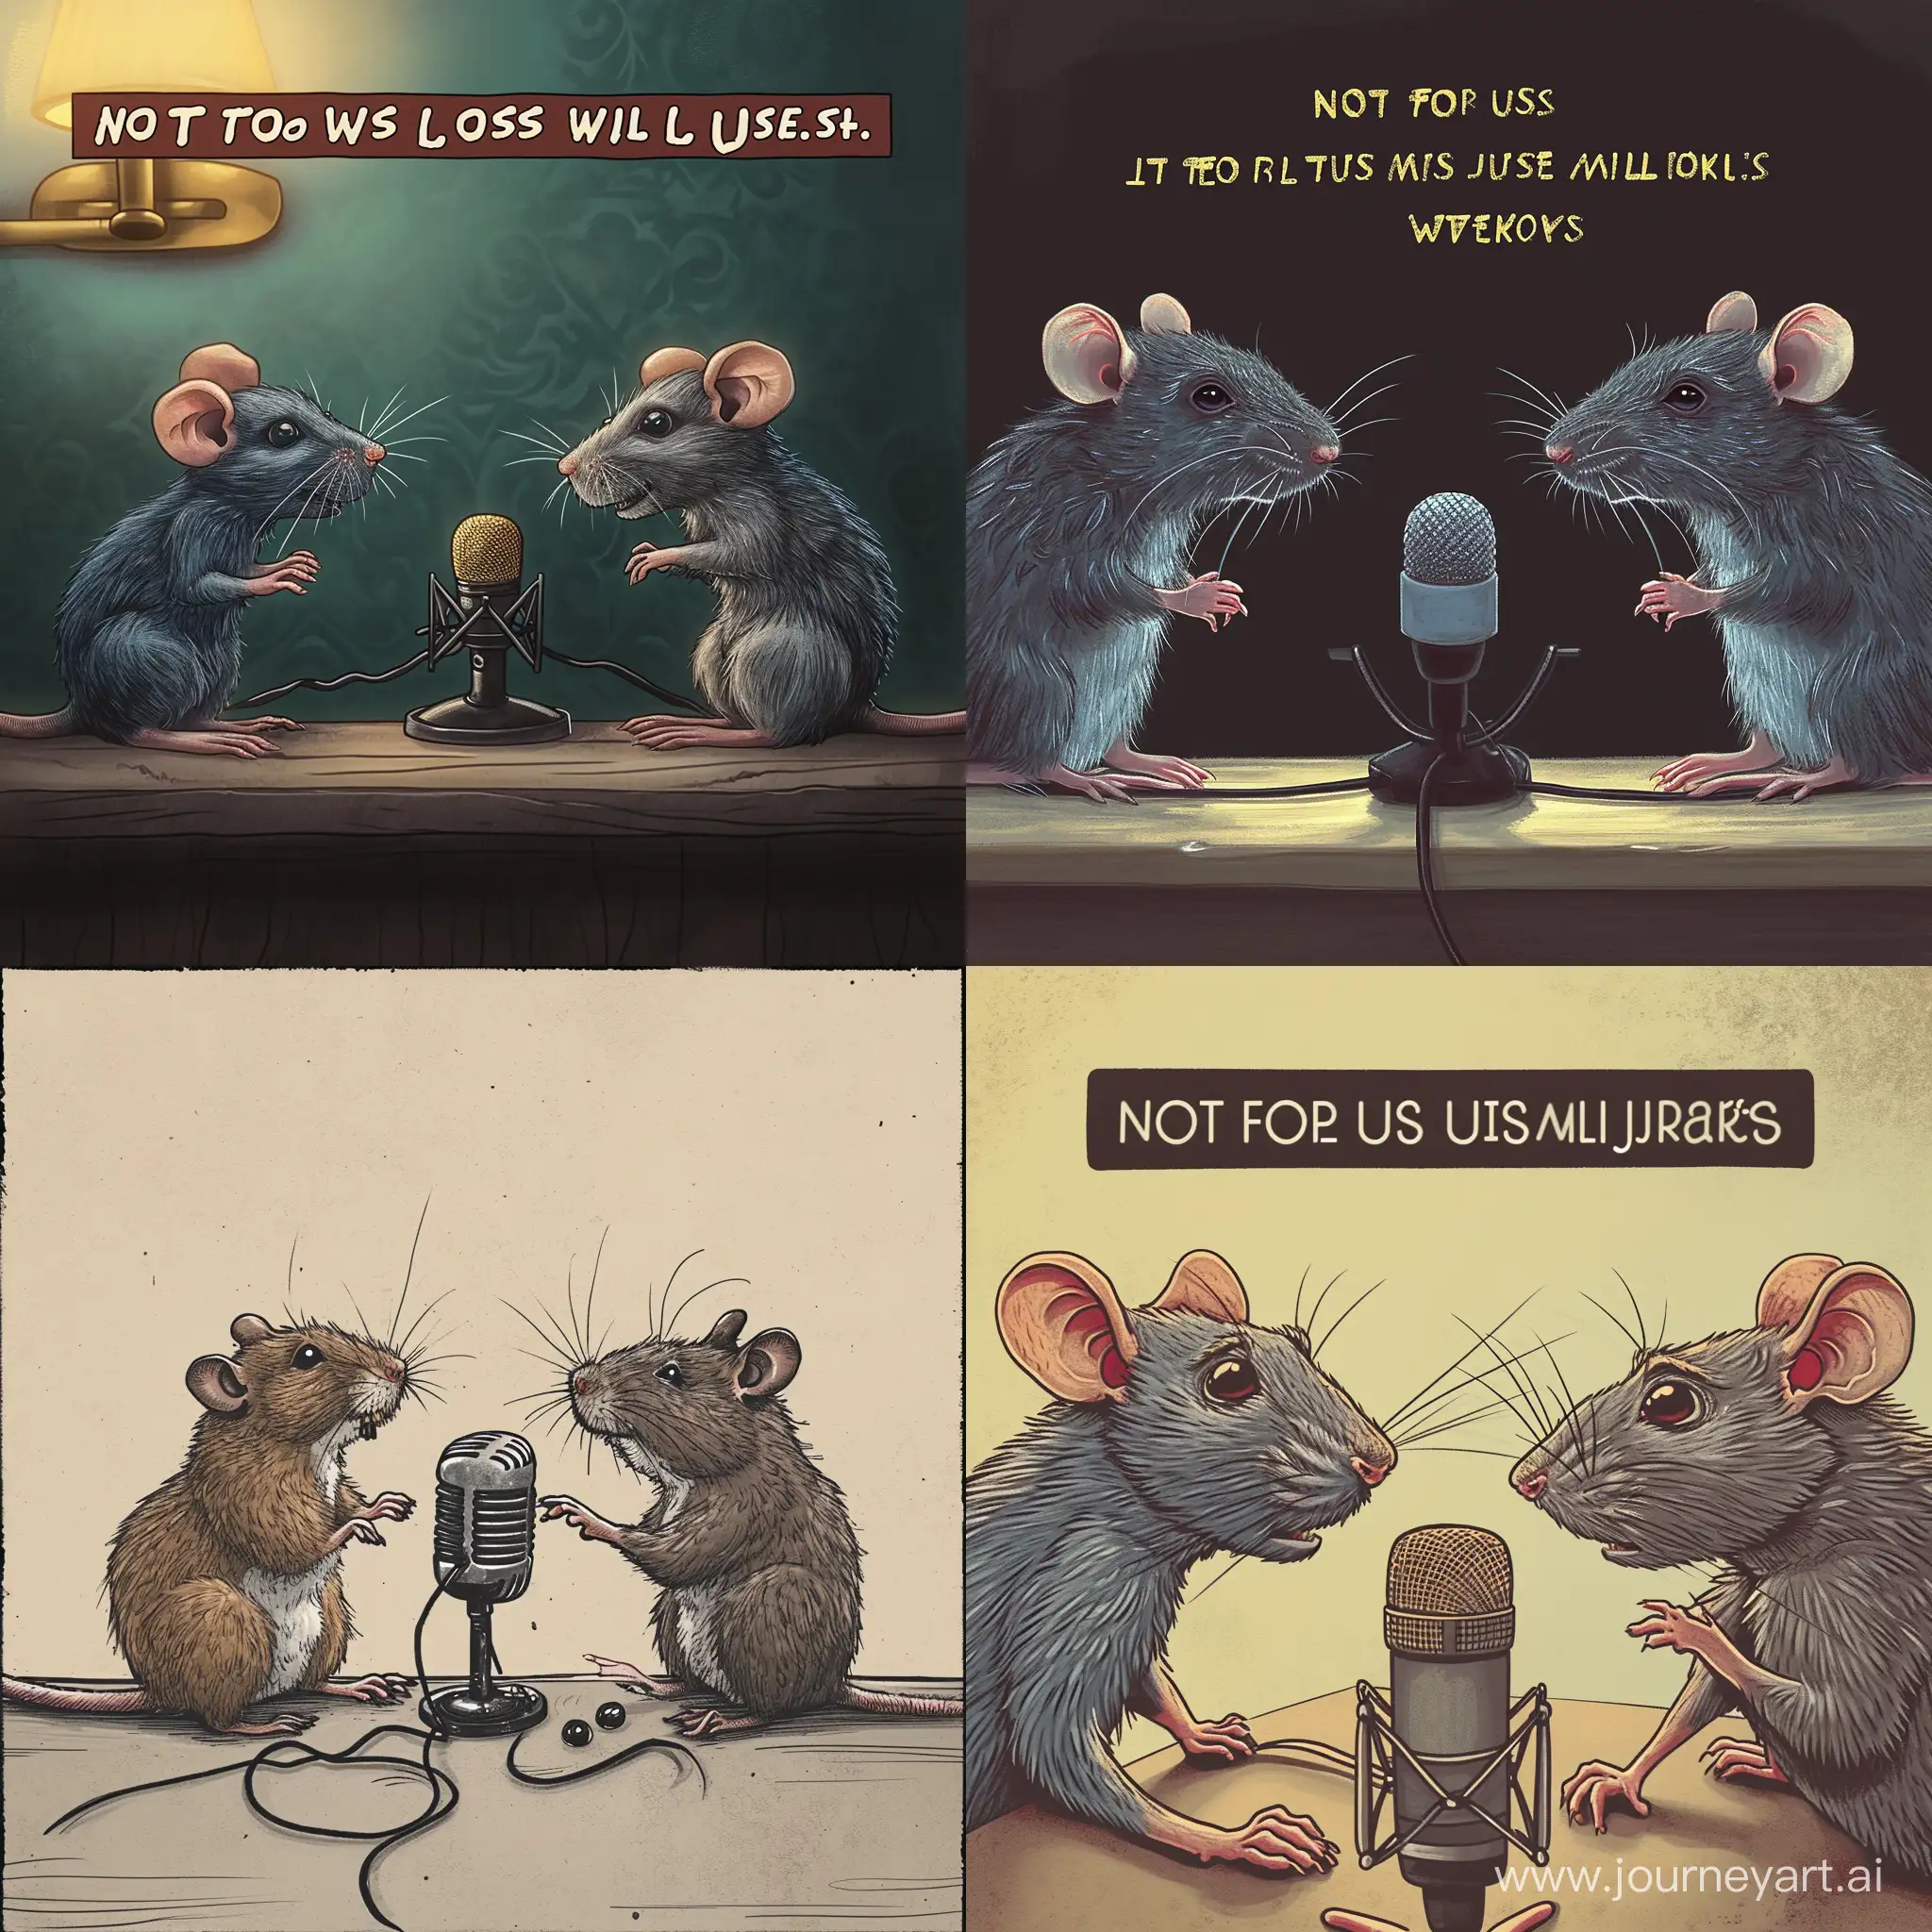 Podcast-Discussion-Two-Rats-Share-Insights-at-the-Microphone